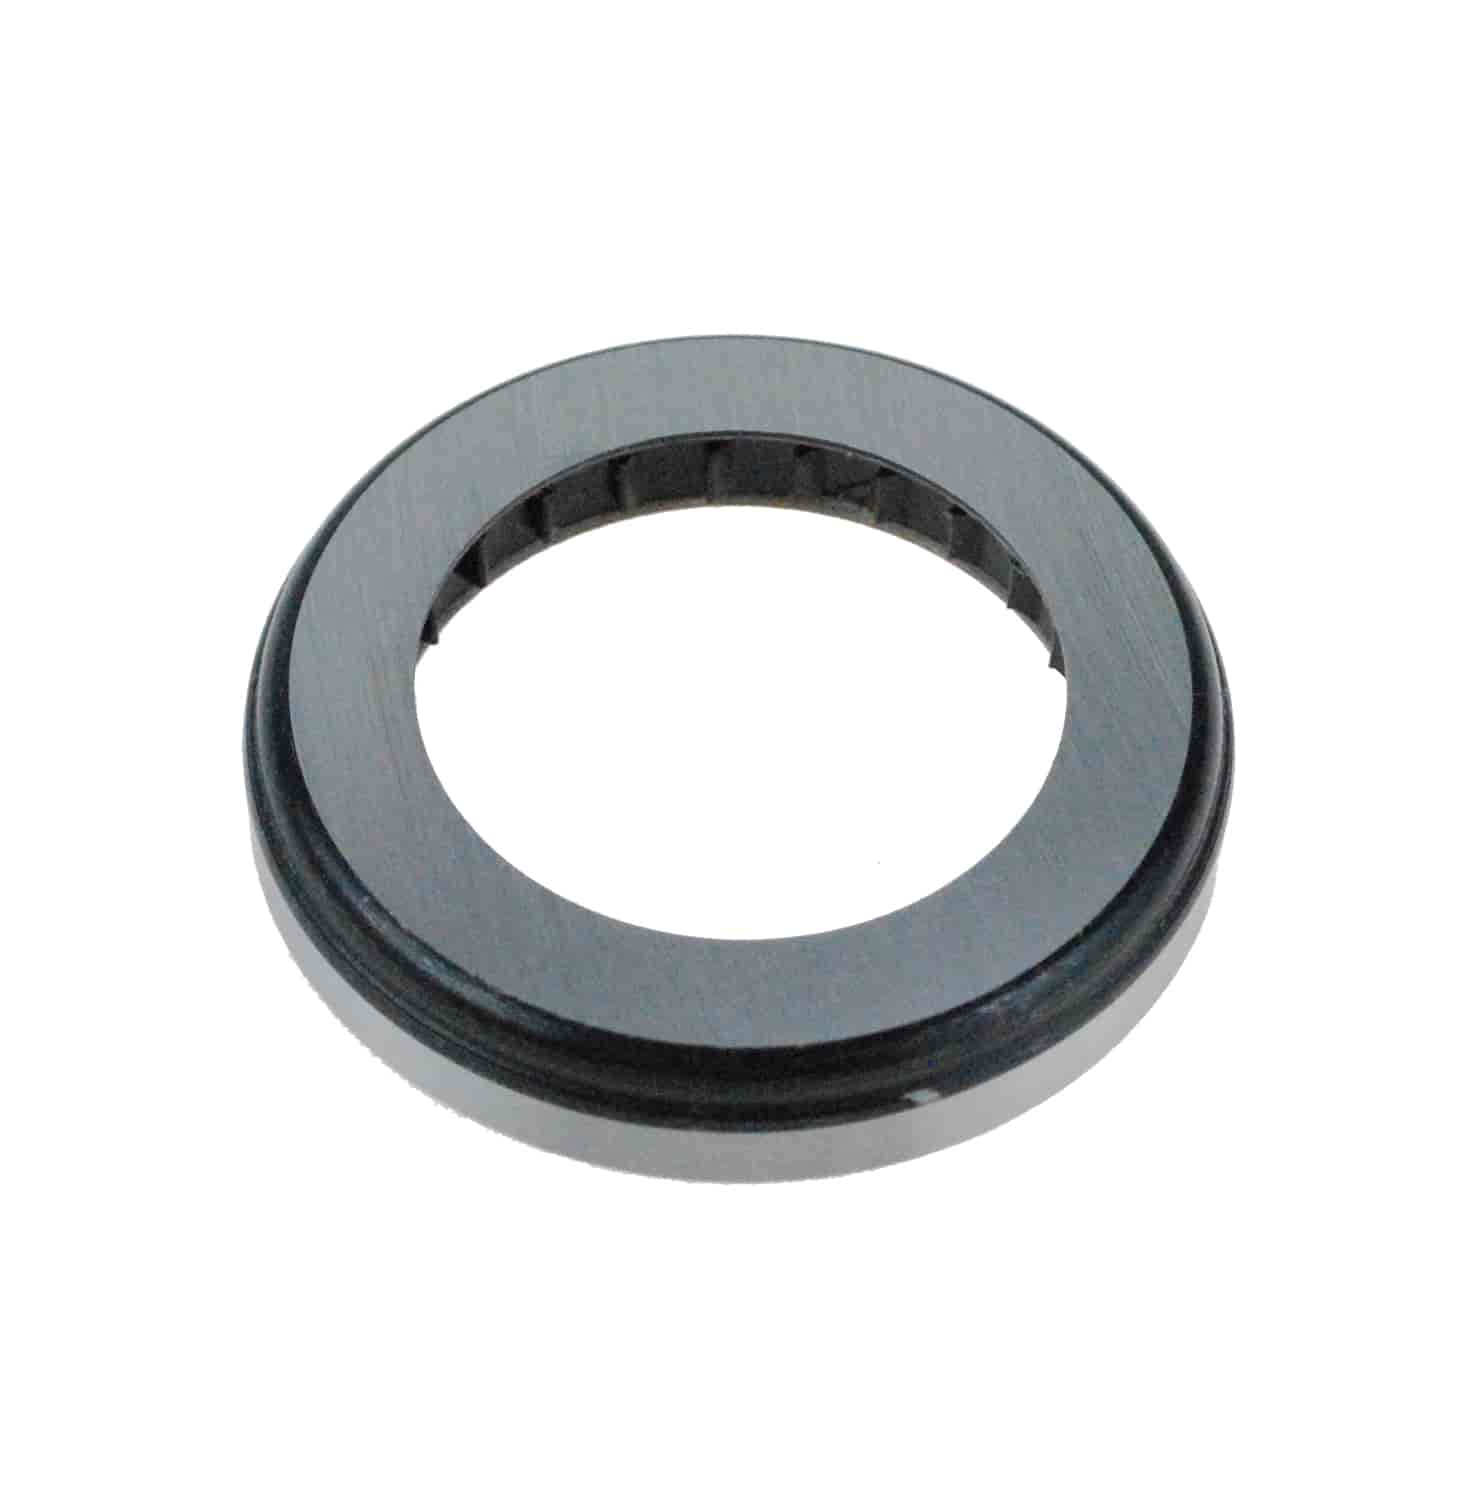 Replacement Bearing Push-On Style for RAM Hydraulic Bearings